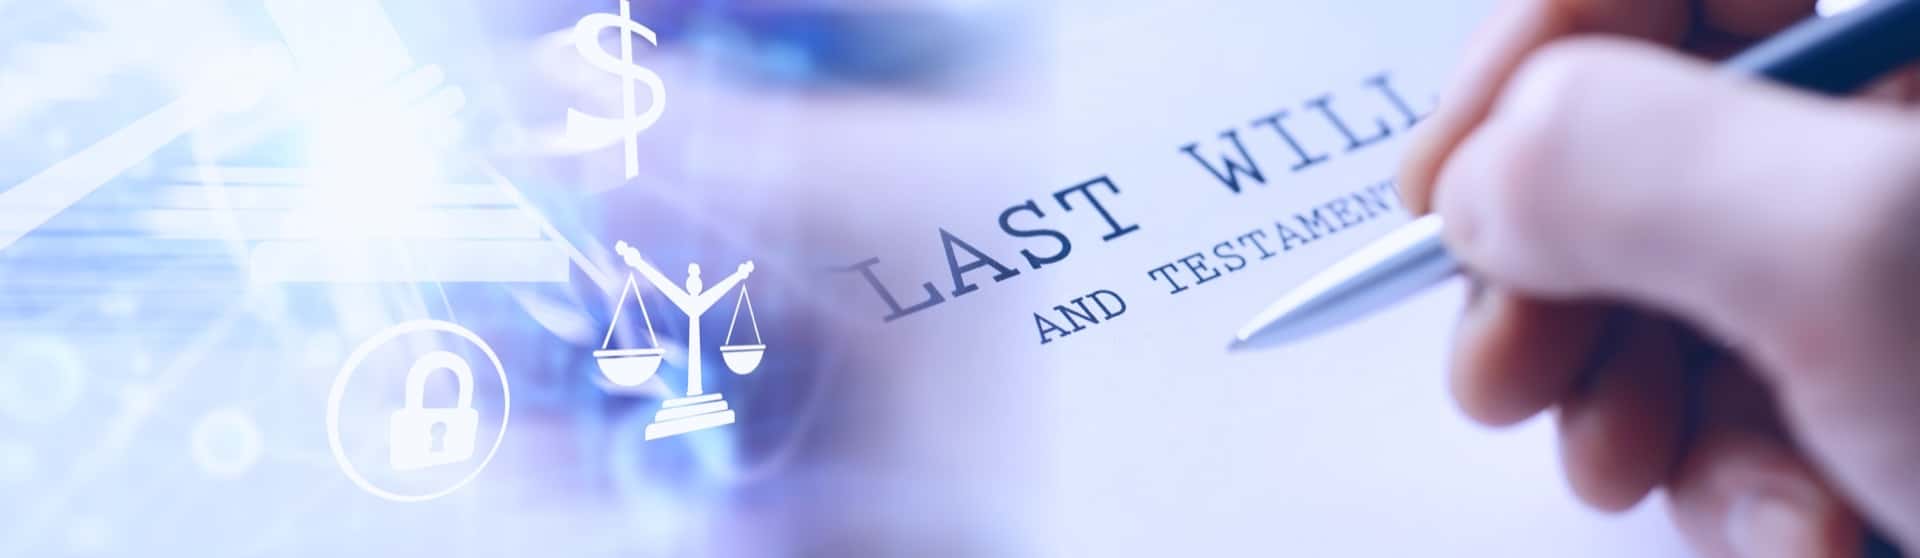 Last Will and Testament Document to be Signed | Living Will vs Living Trust​ | Legacy Law Group